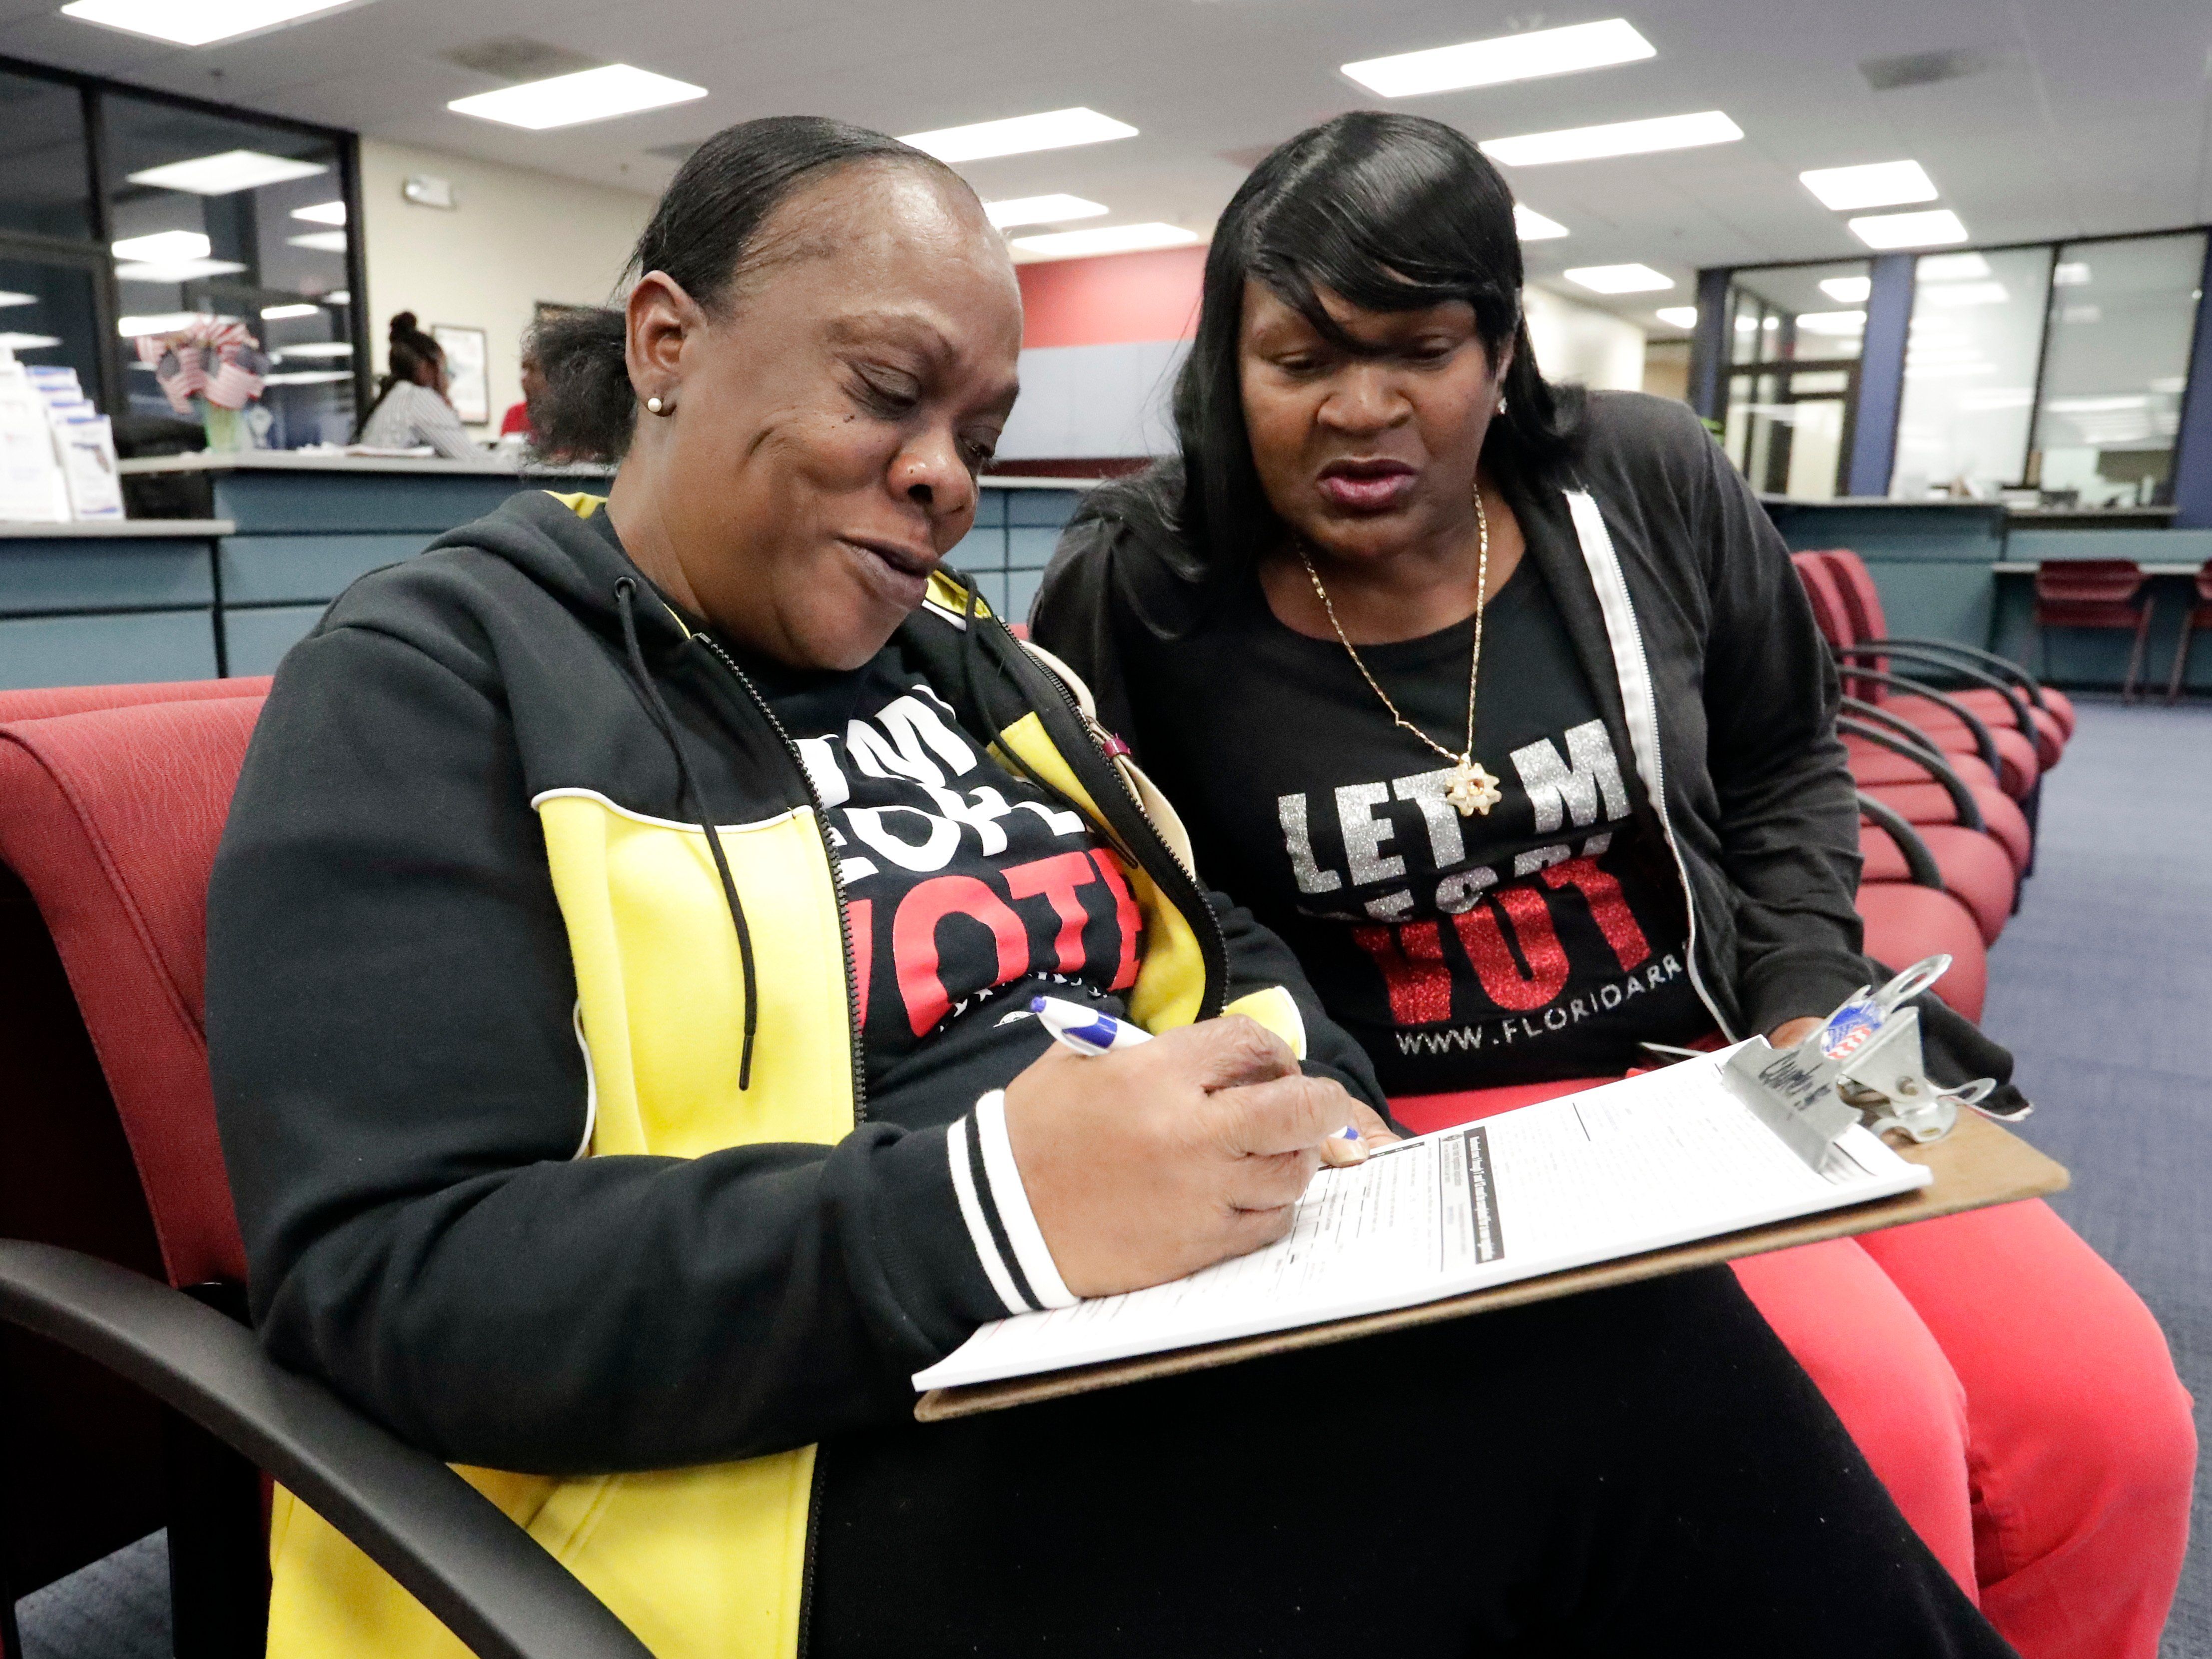 Former felon Yolanda Wilcox, left, fills out a voter registration form as her best friend Gale Buswell looks on at the Supervisor of Elections office Tuesday, Jan. 8, 2019, in Orlando, Fla. Former felons in Florida began registering for elections on…